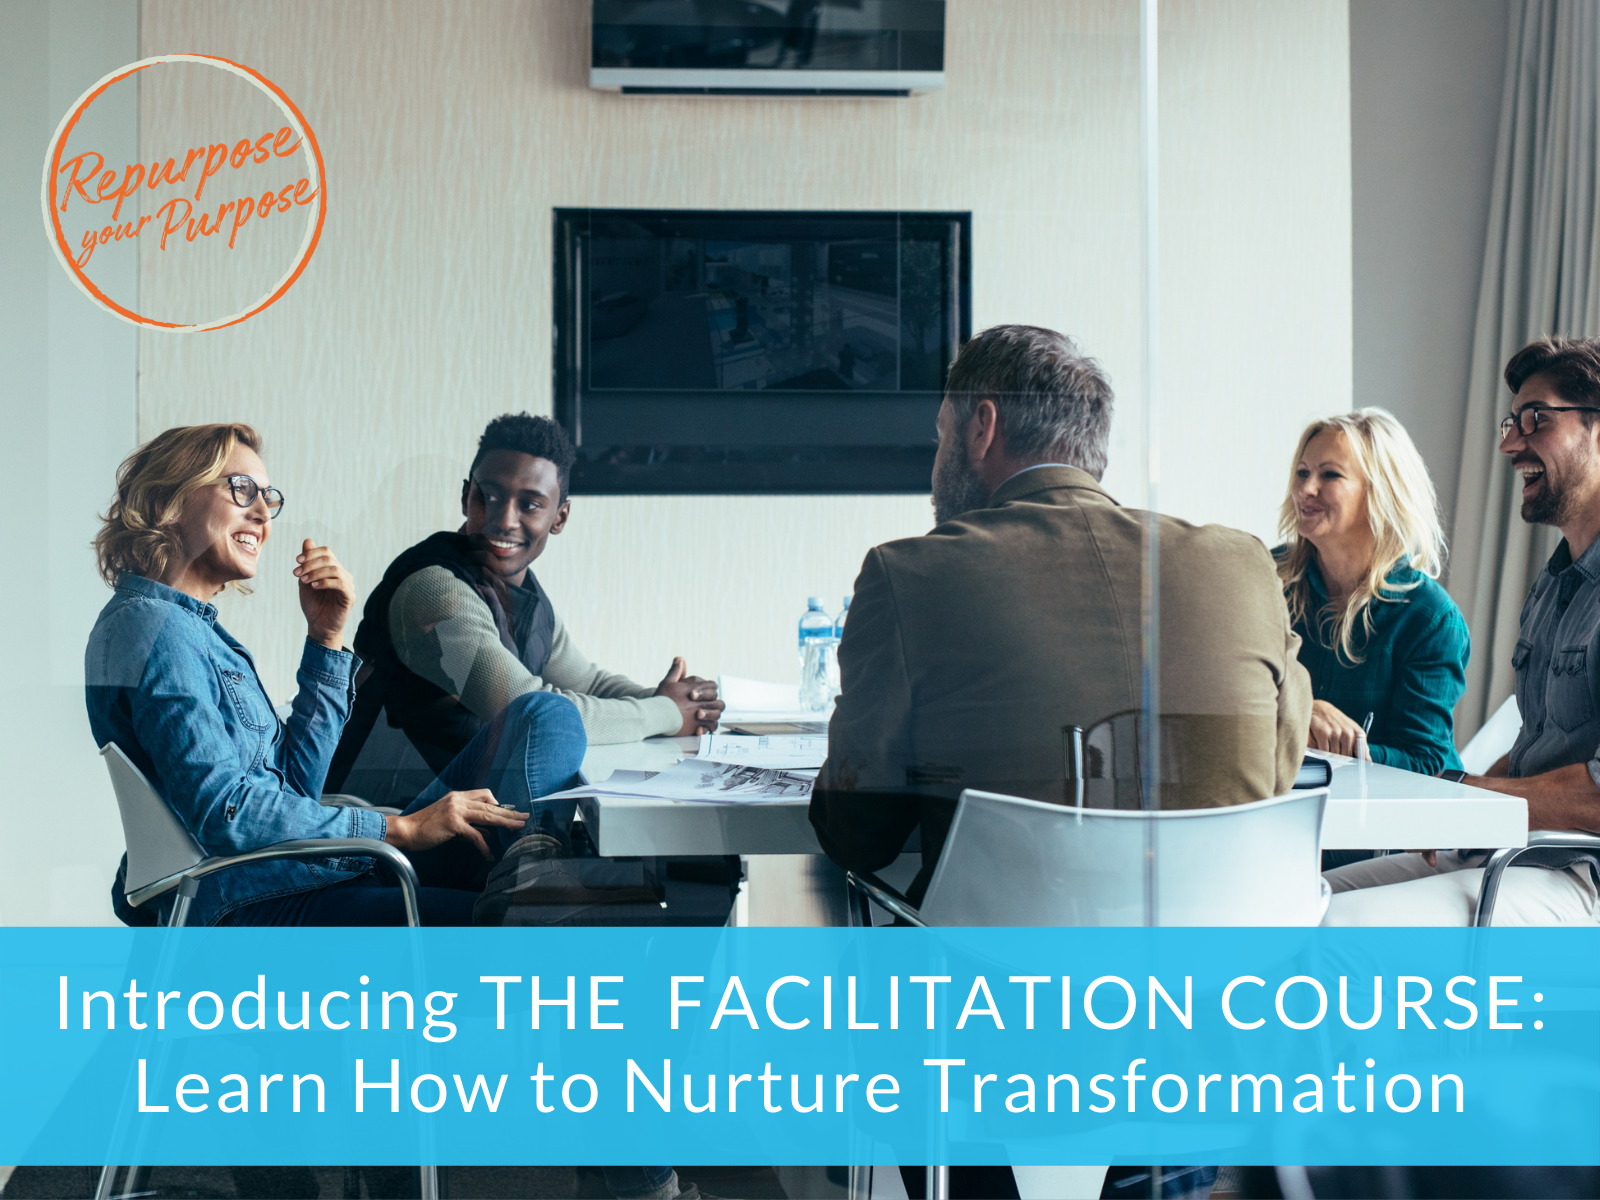 Introducing THE FACILITATION COURSE: Learn How to Nurture Transformation